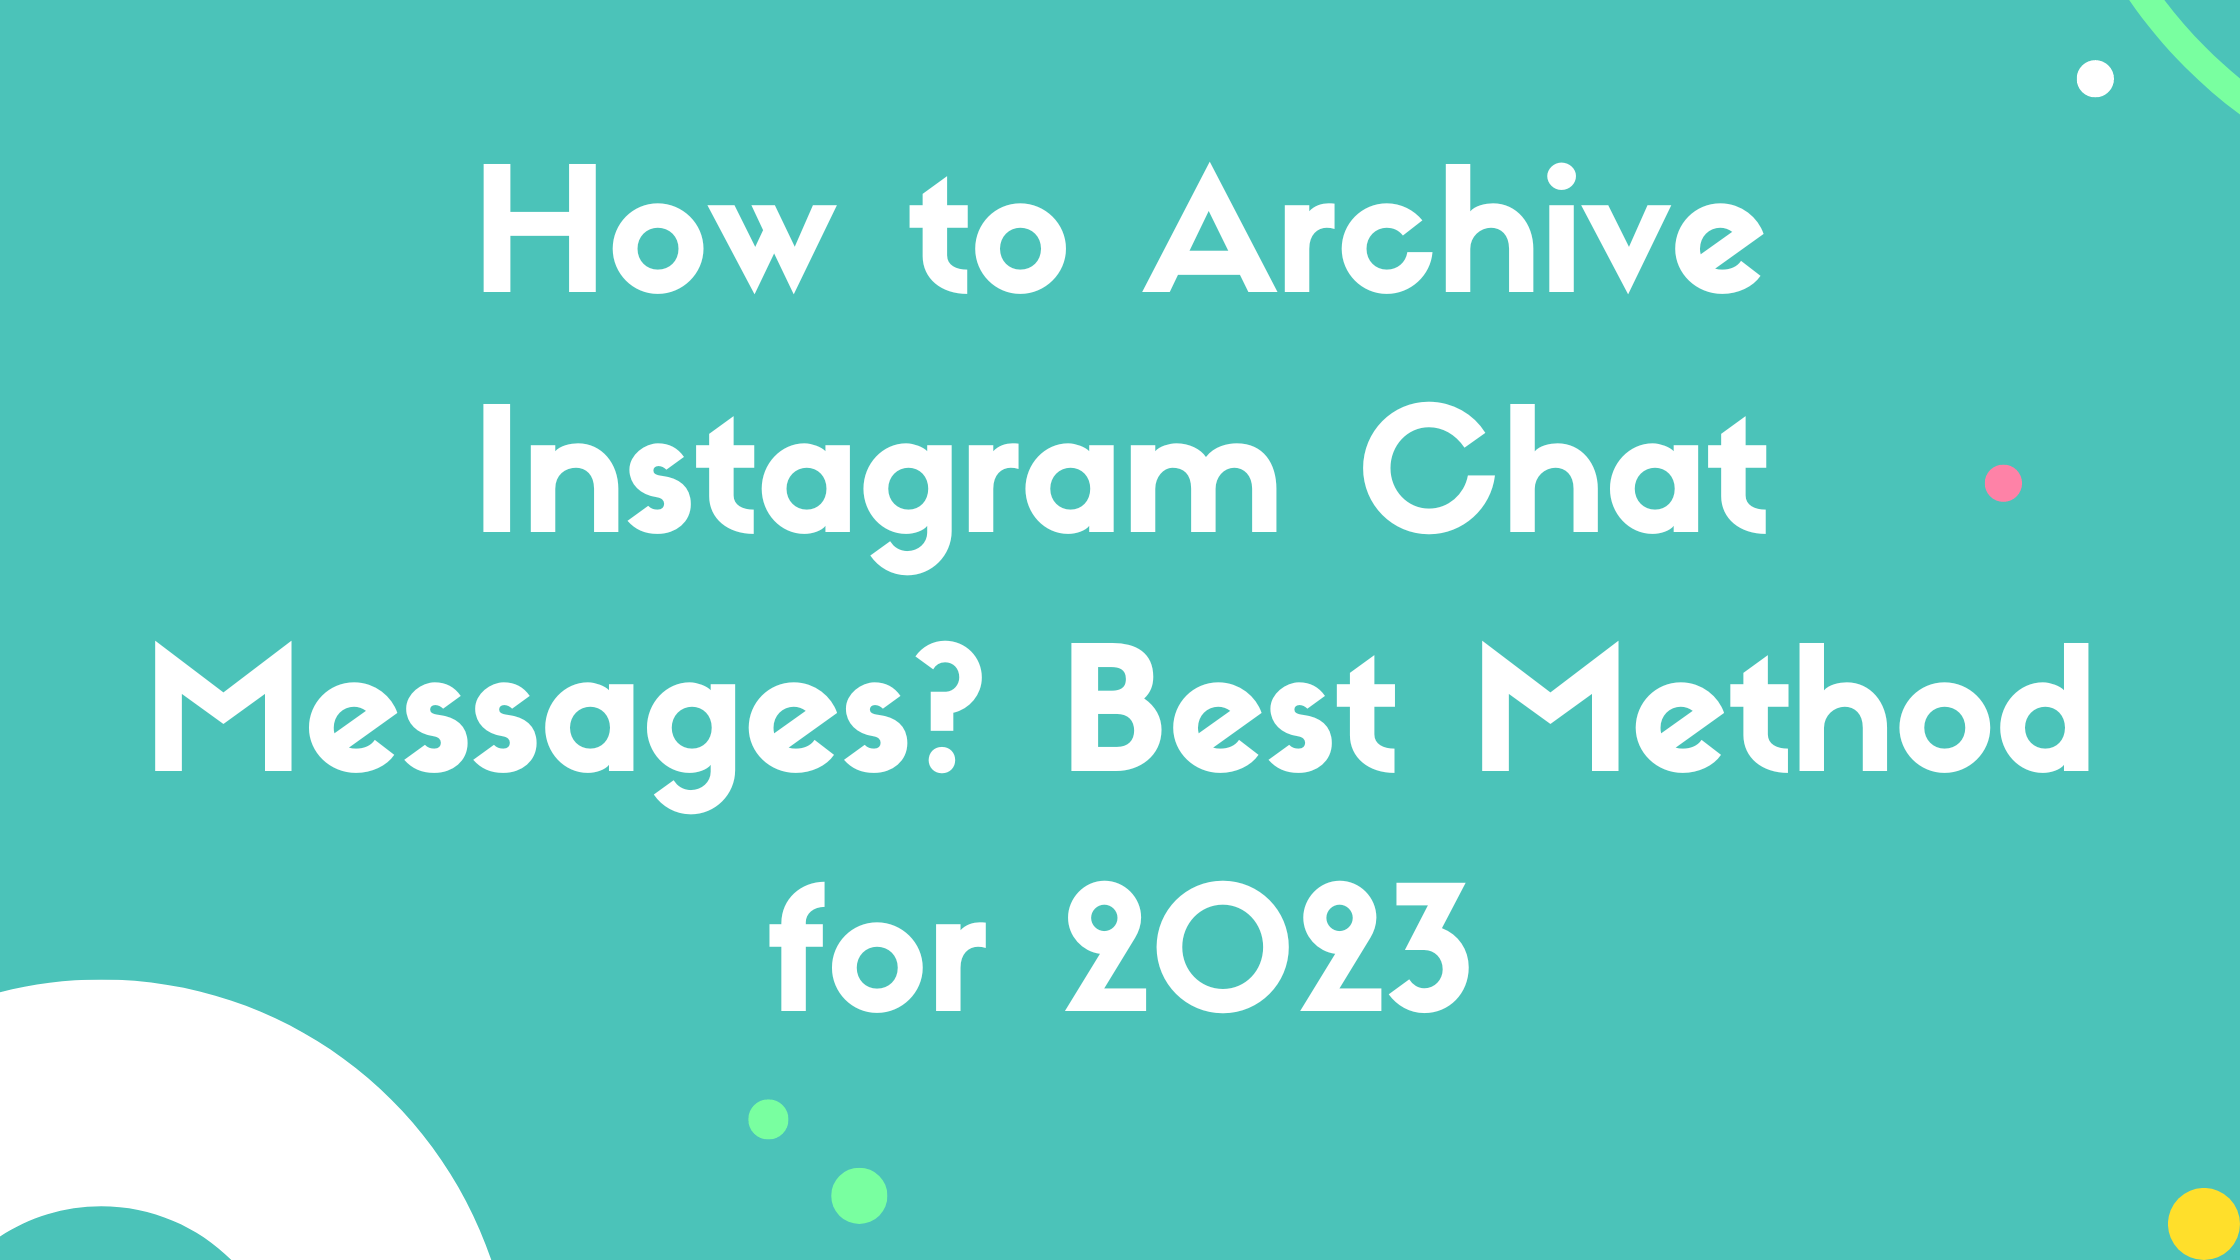 How to Archive Instagram Chat Messages? Best Method for 2023